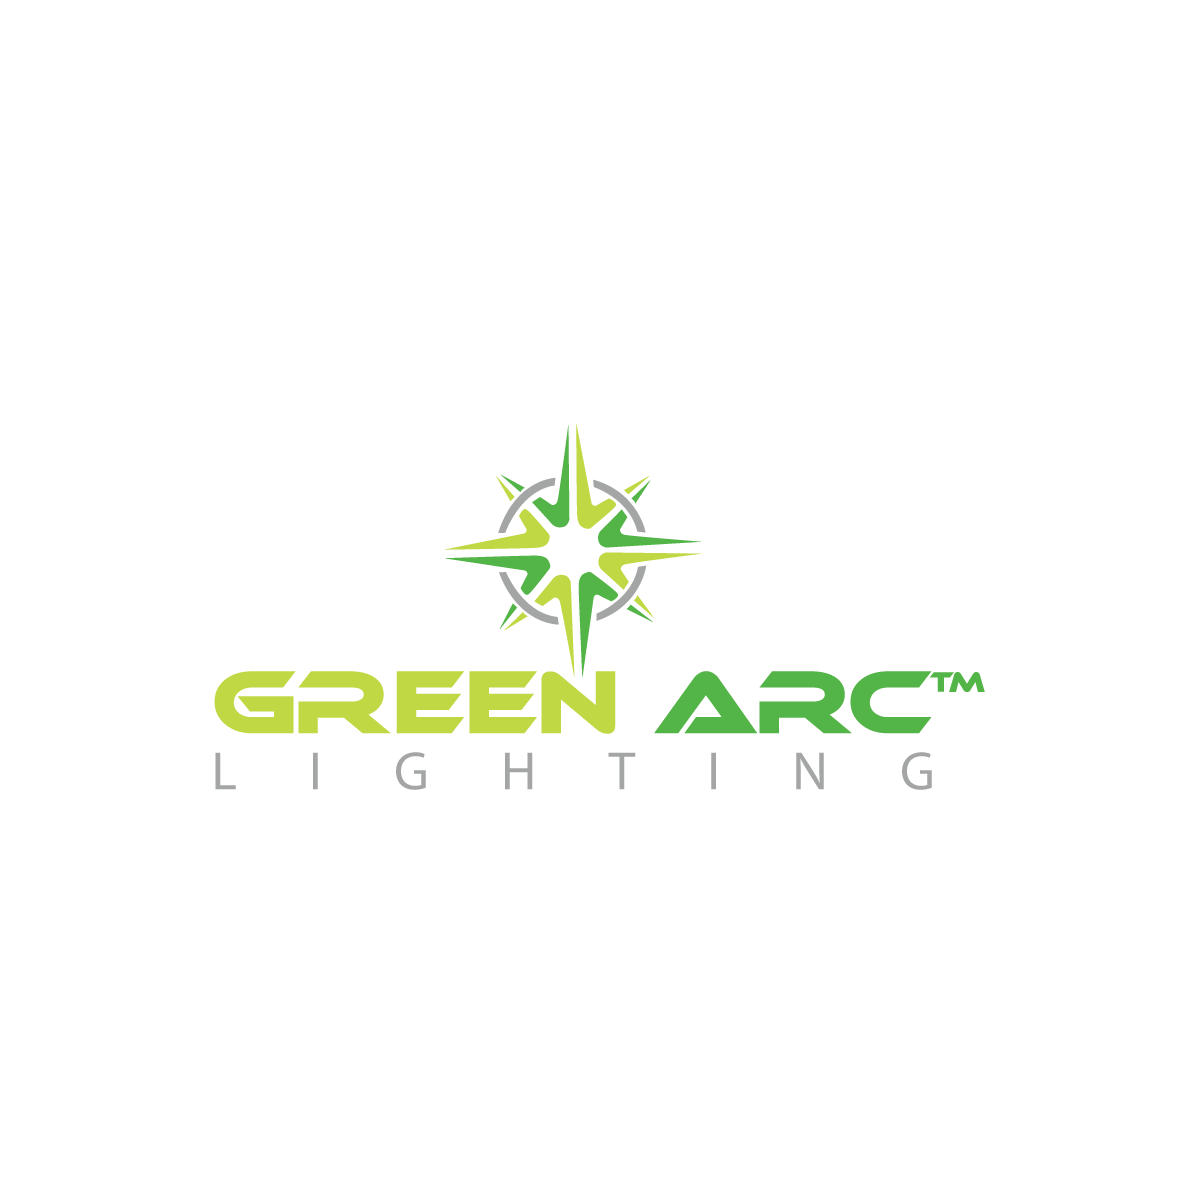 Green Arc Lighting to Provide Commercial and
Industrial Lighting Services to Clients
Nationally: Guy Albert de Chimay